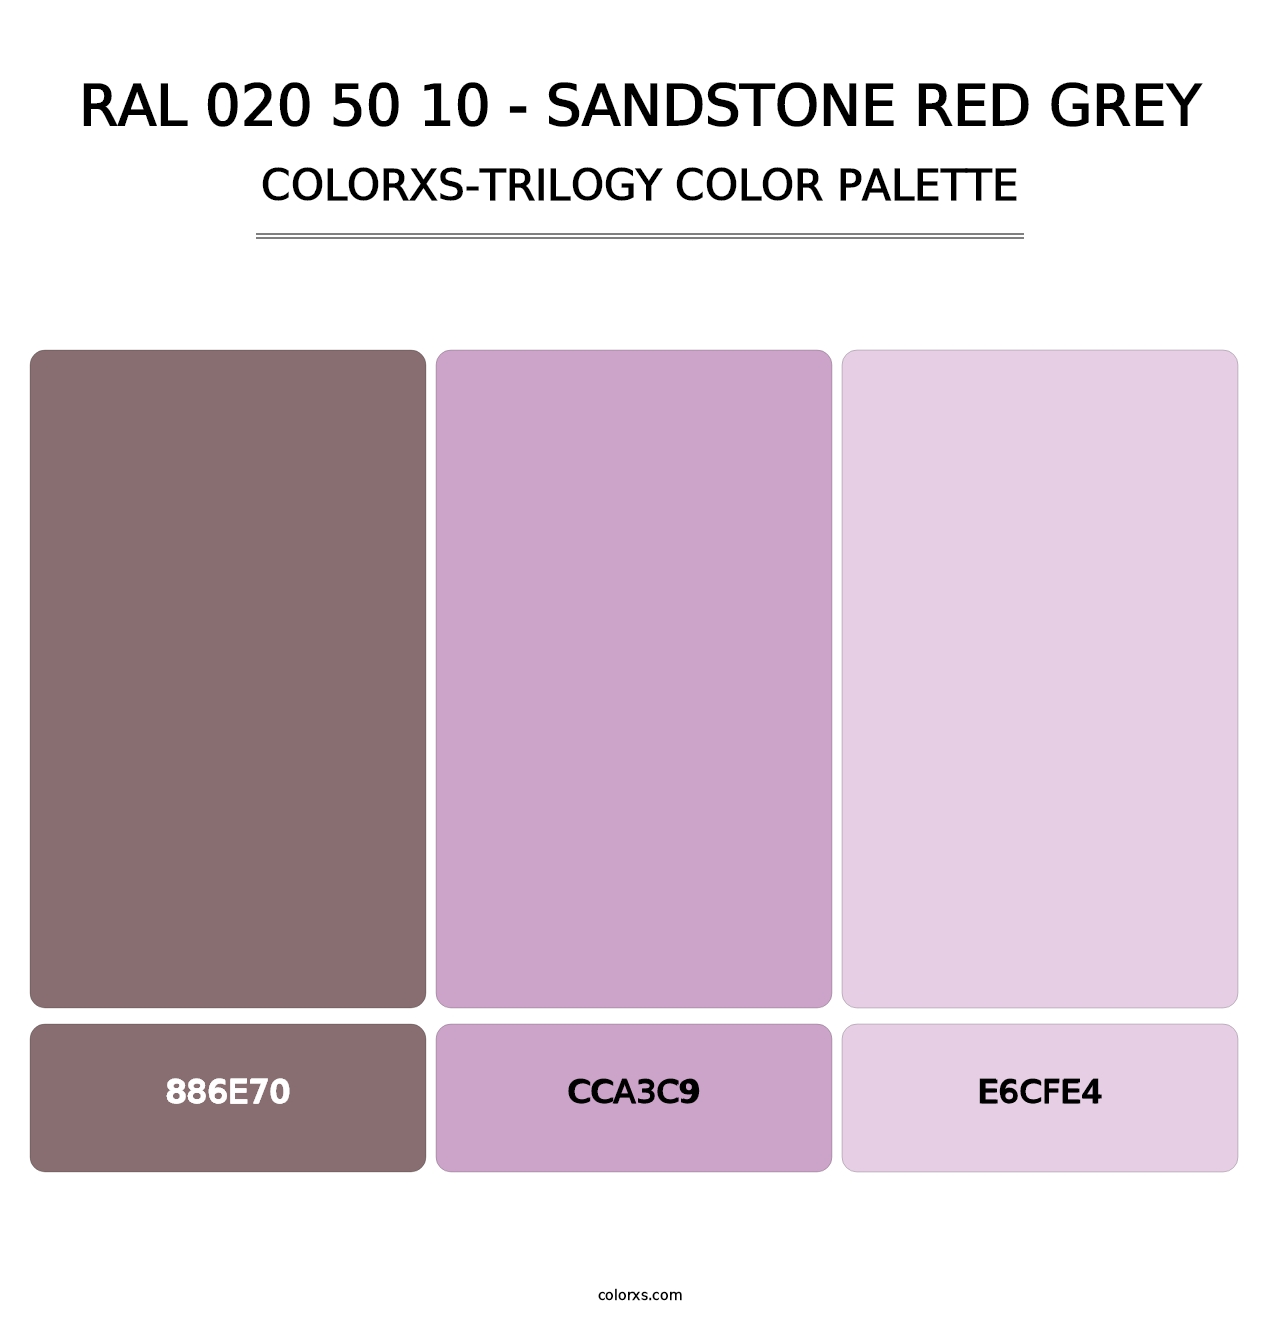 RAL 020 50 10 - Sandstone Red Grey - Colorxs Trilogy Palette